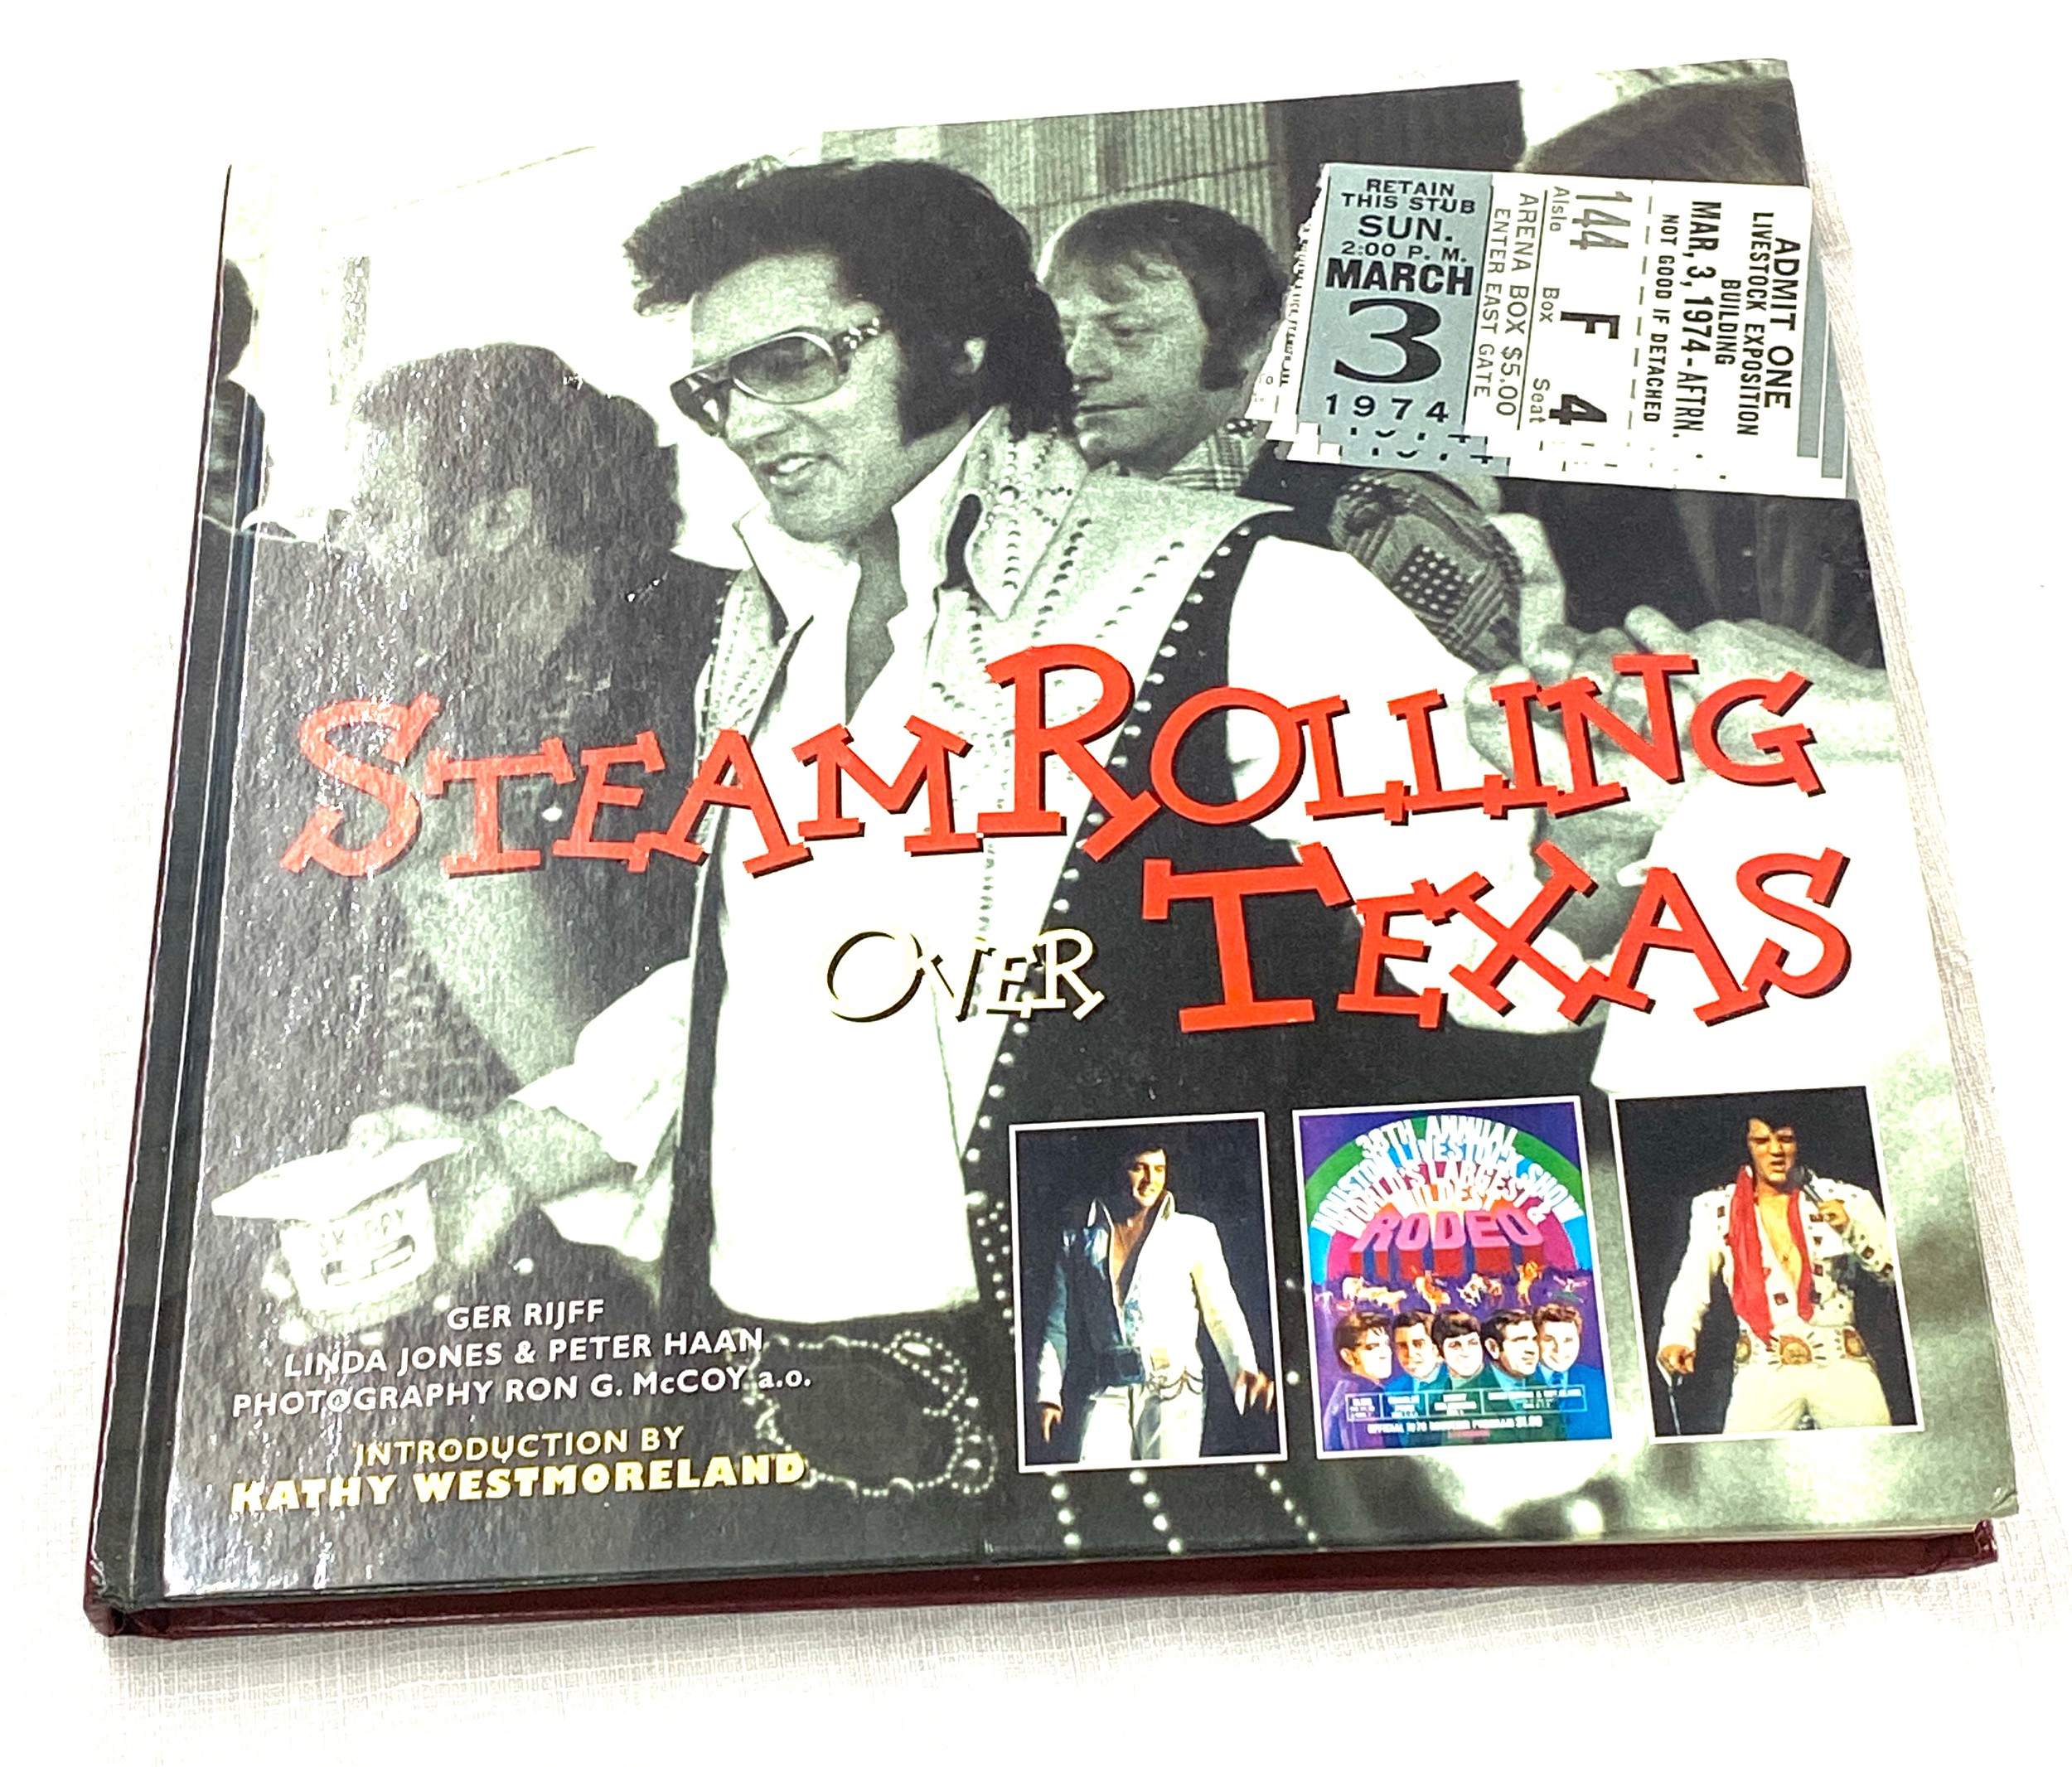 Steam Rolling Over Texas by Ger Rijff hard back book